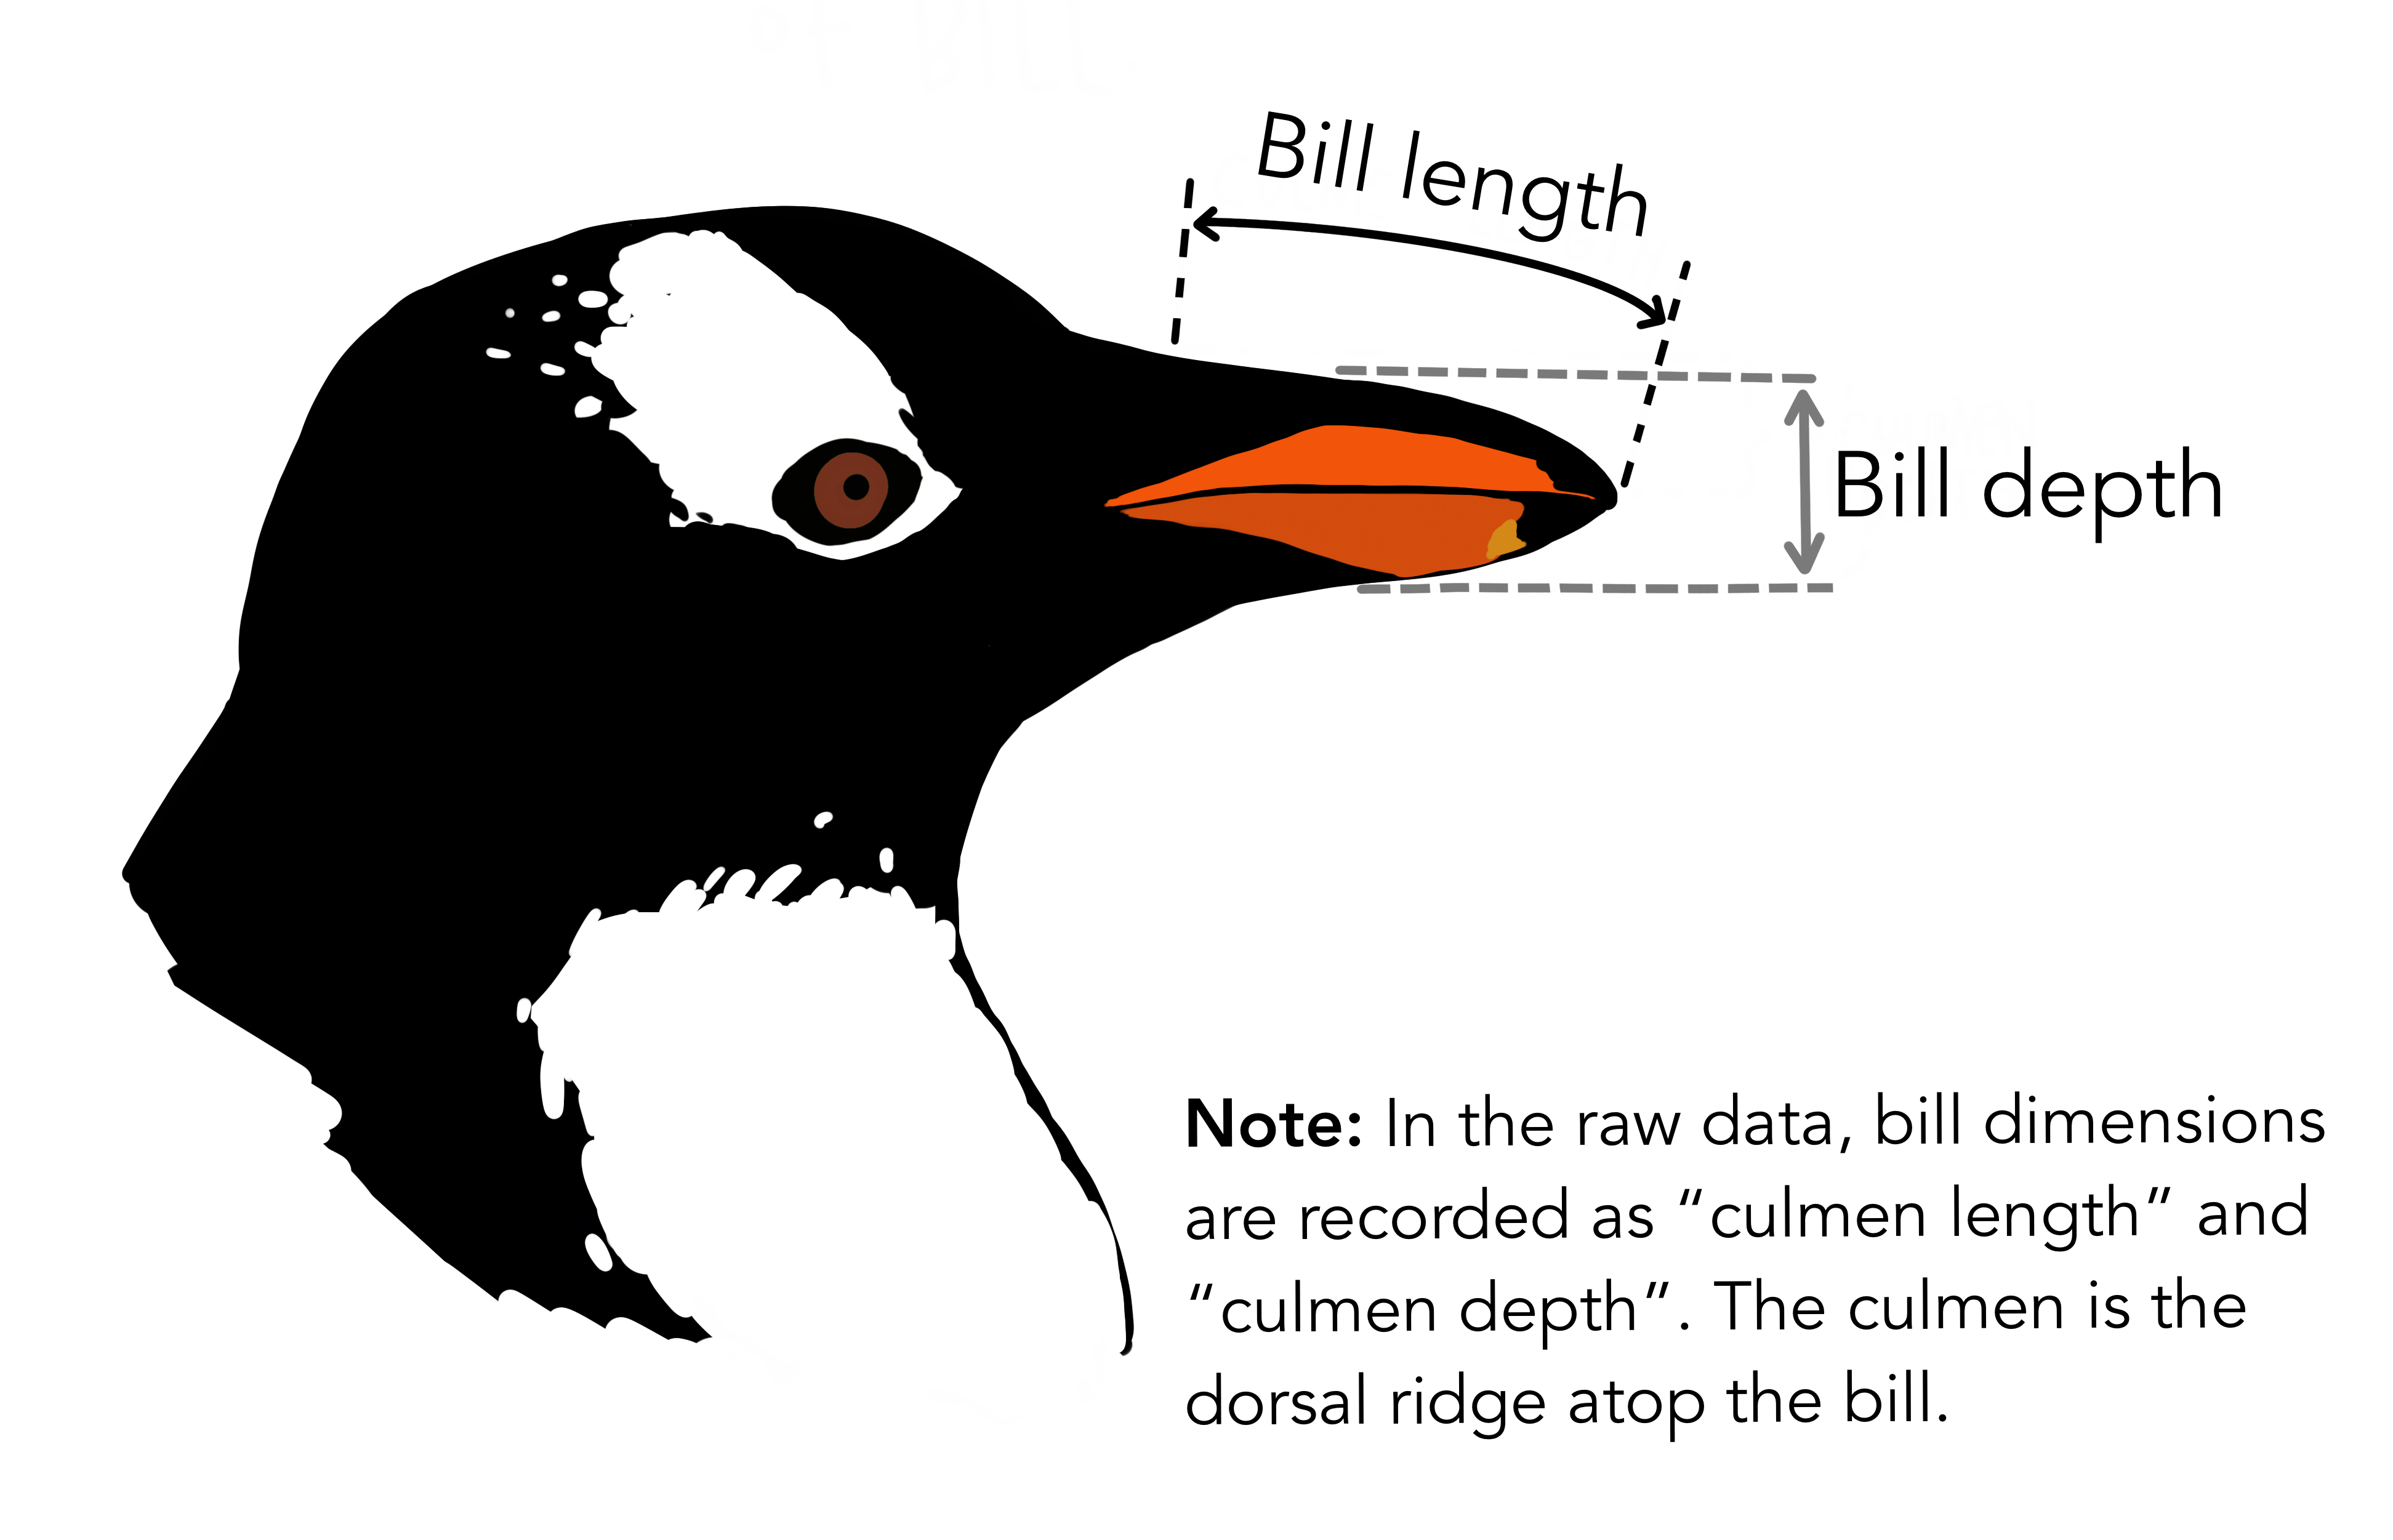 a cute image showing the bill length as the horizontal (sticking out from the face) length of the penguin bill, and the bill depth as the vertical (perpendicular to the ground) bill depth